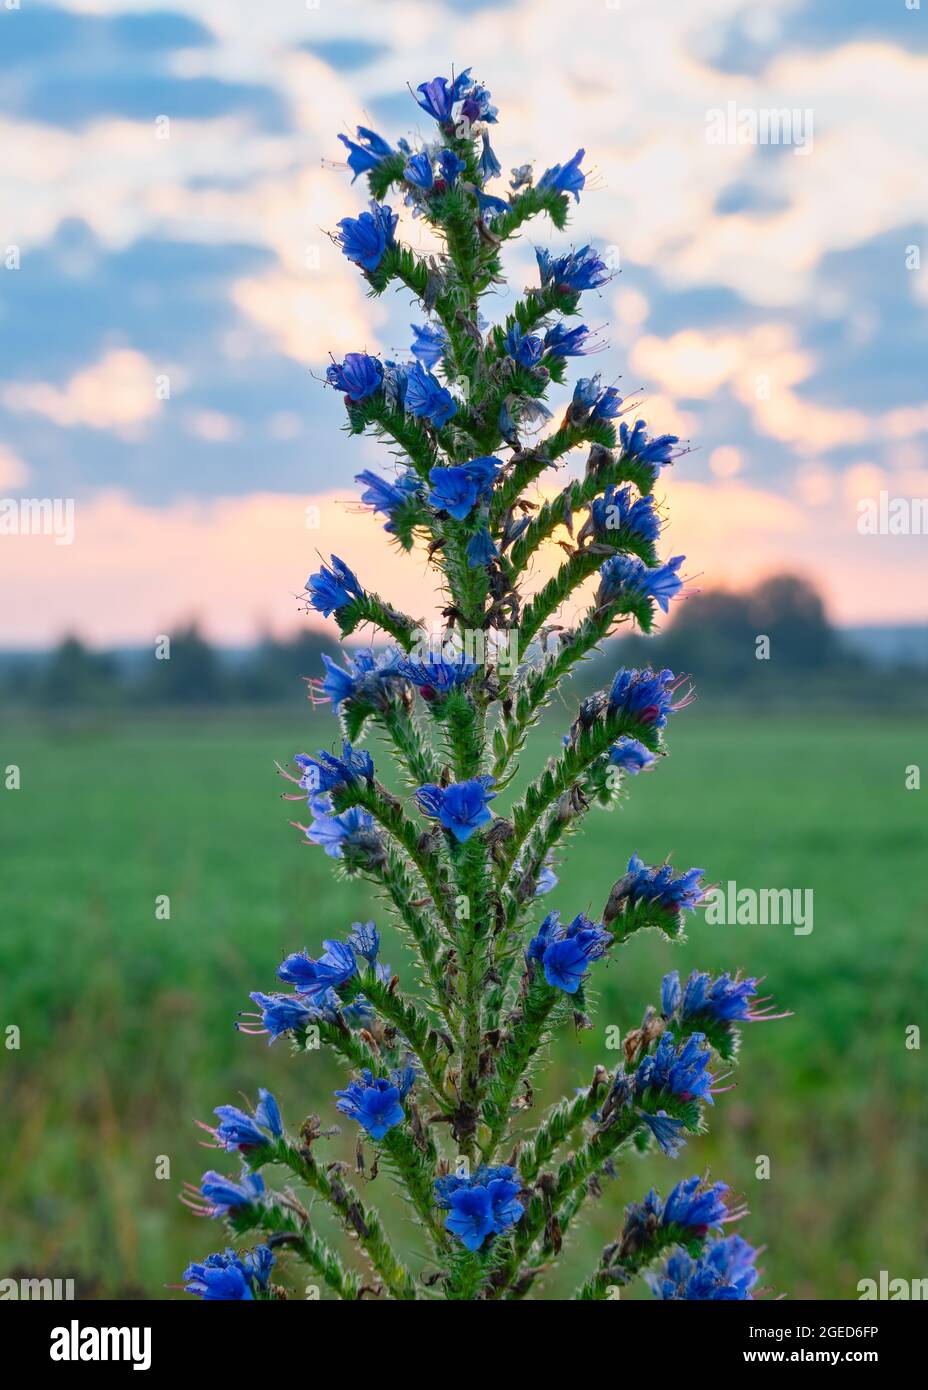 Tall Echium Vulgare, or blueweed, with blue blossoms in the rising sun close-up shot. Native to Europe and temperate Asia. Wildlife, sunrises, common Stock Photo